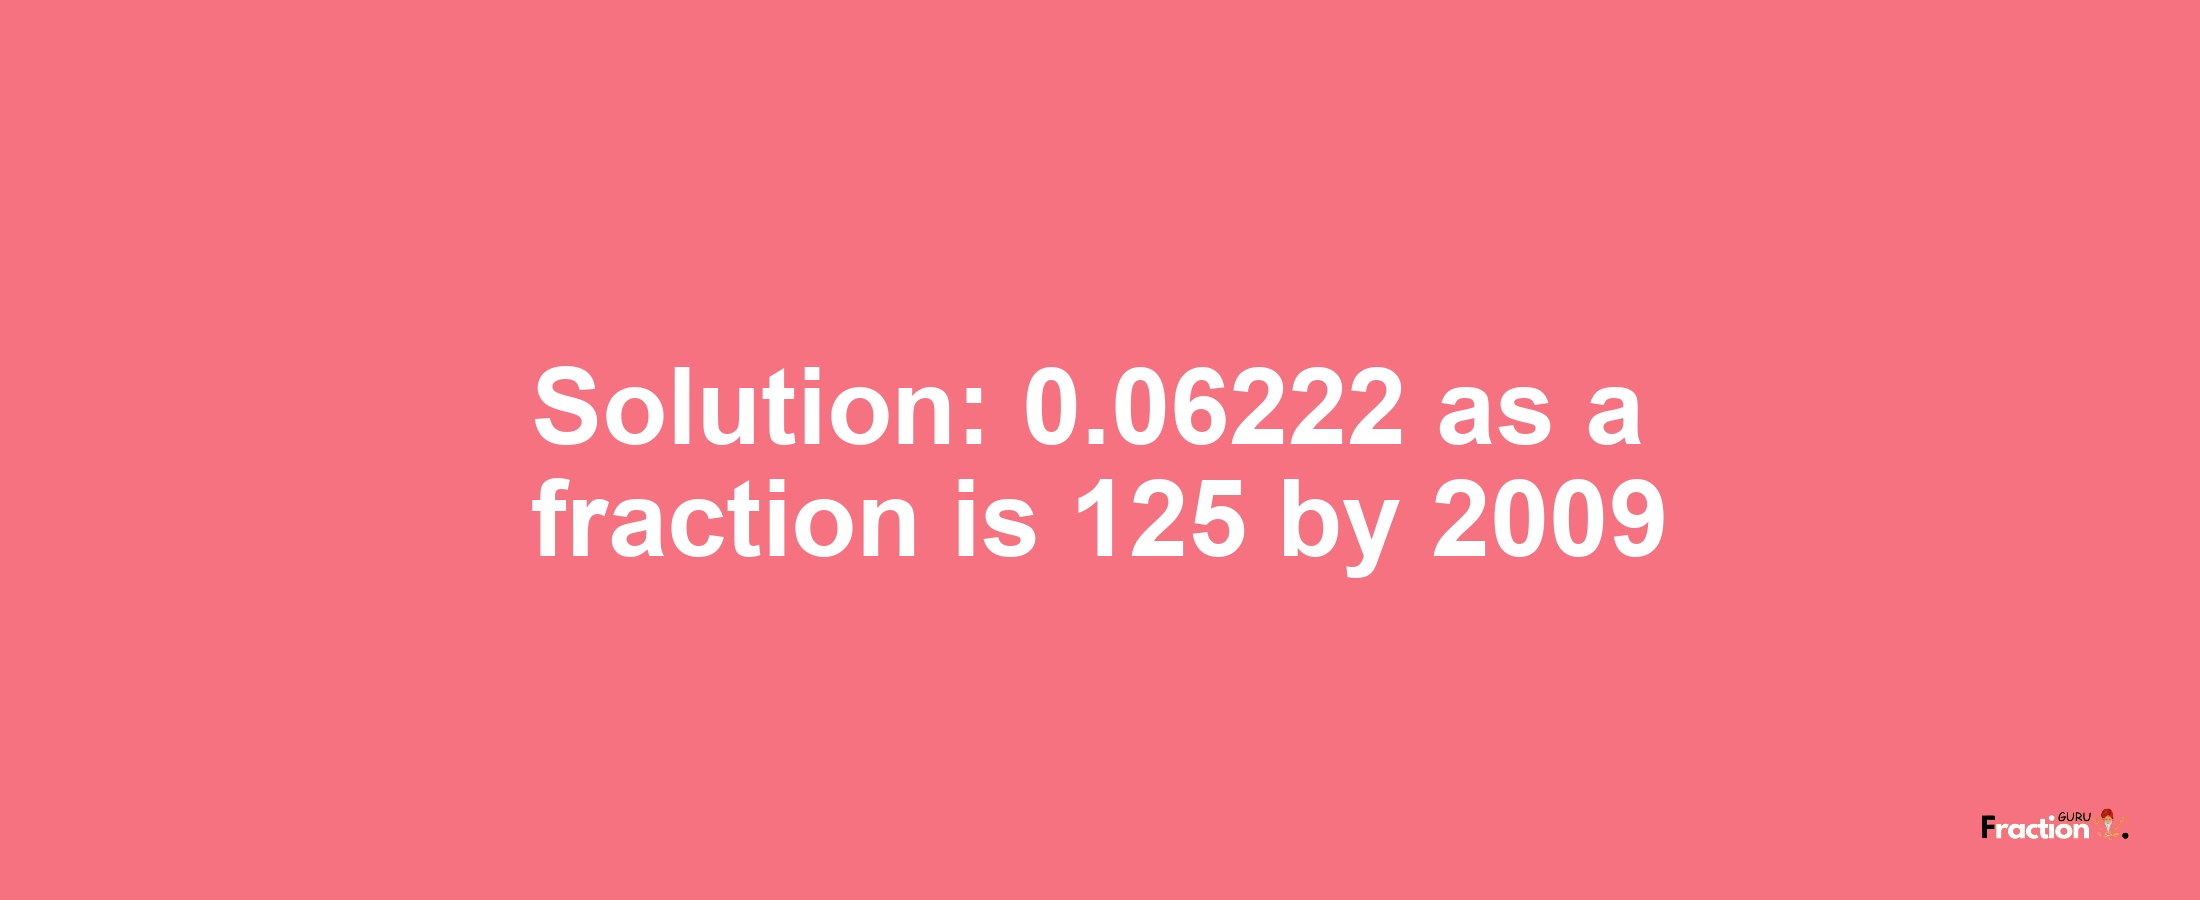 Solution:0.06222 as a fraction is 125/2009